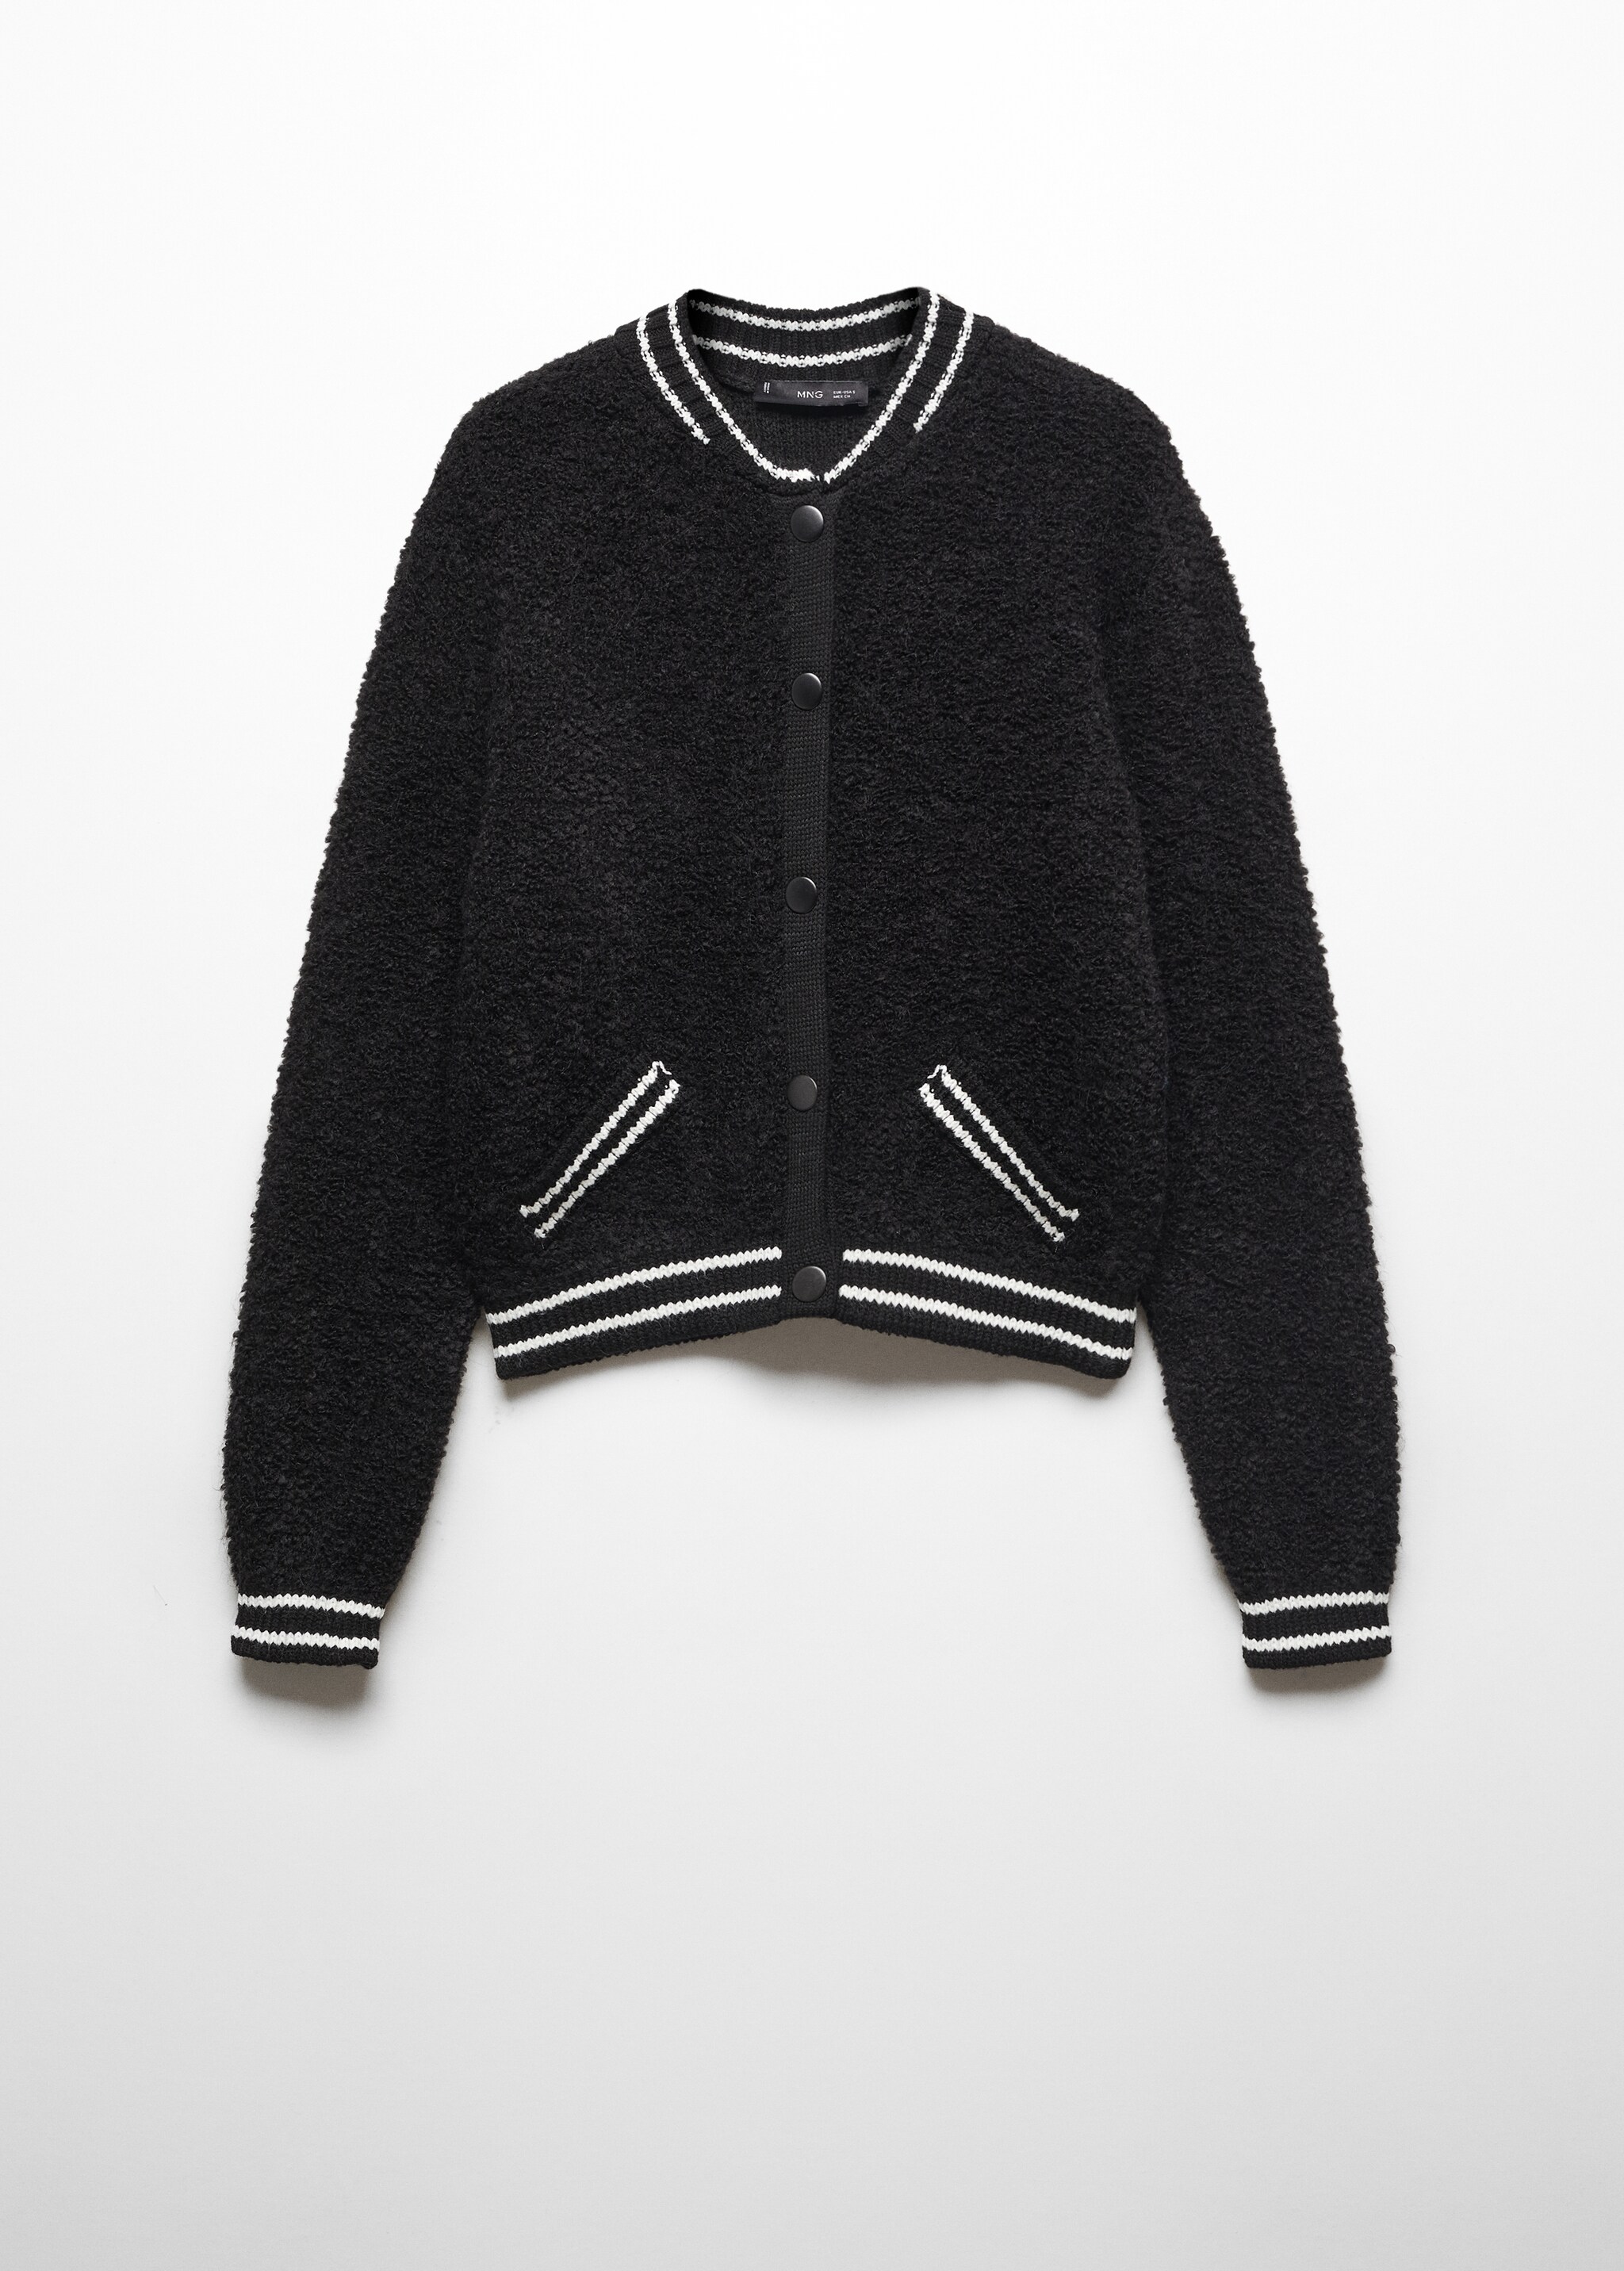 Knitted bomber jacket - Article without model